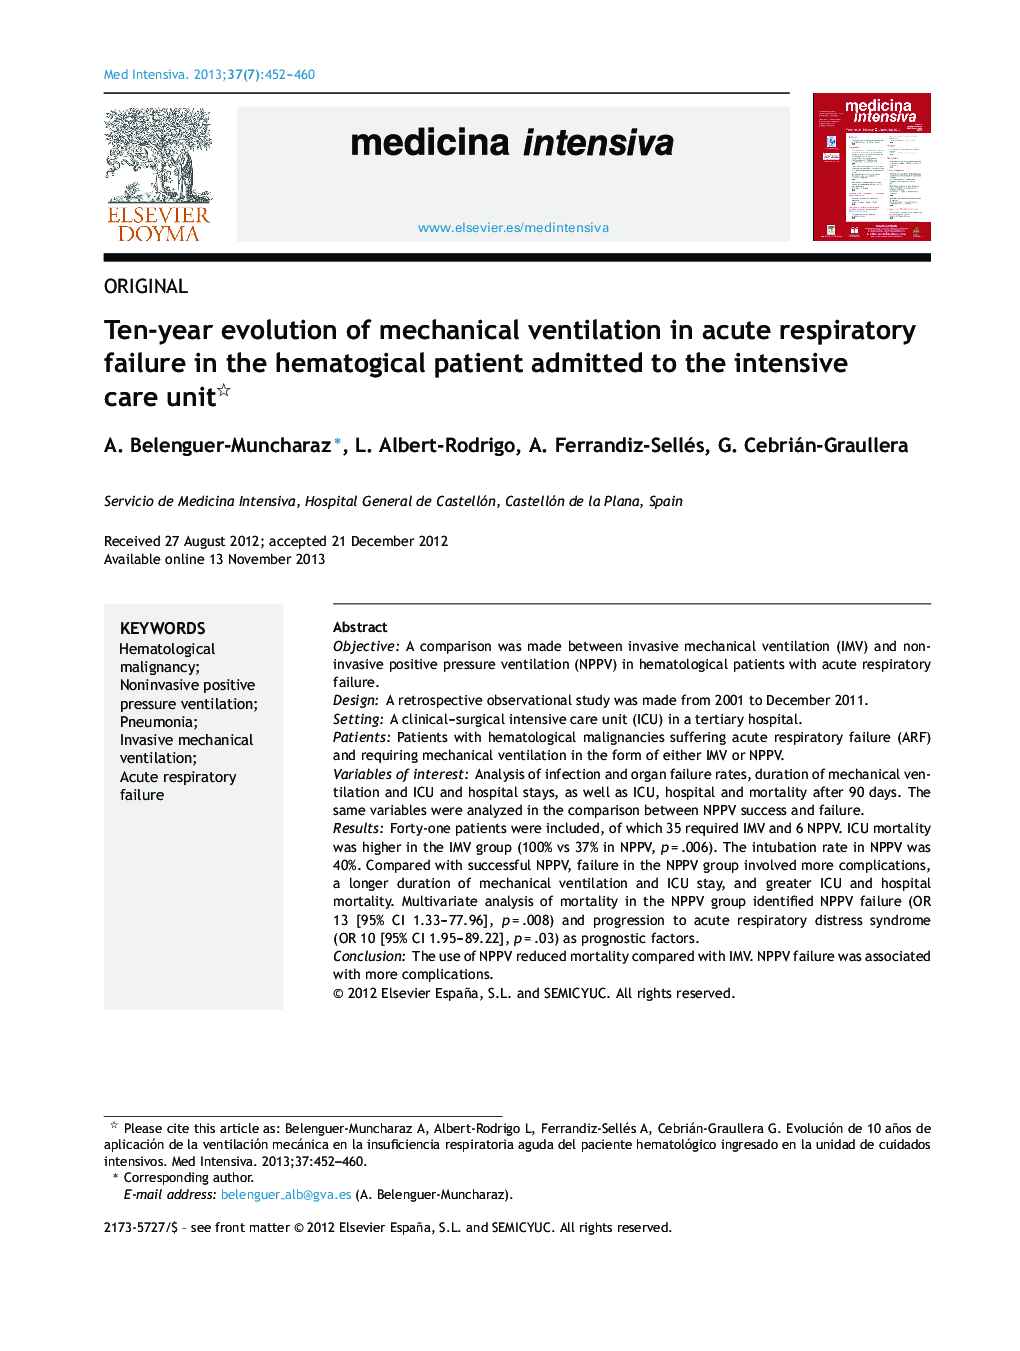 Ten-year evolution of mechanical ventilation in acute respiratory failure in the hematogical patient admitted to the intensive care unit 